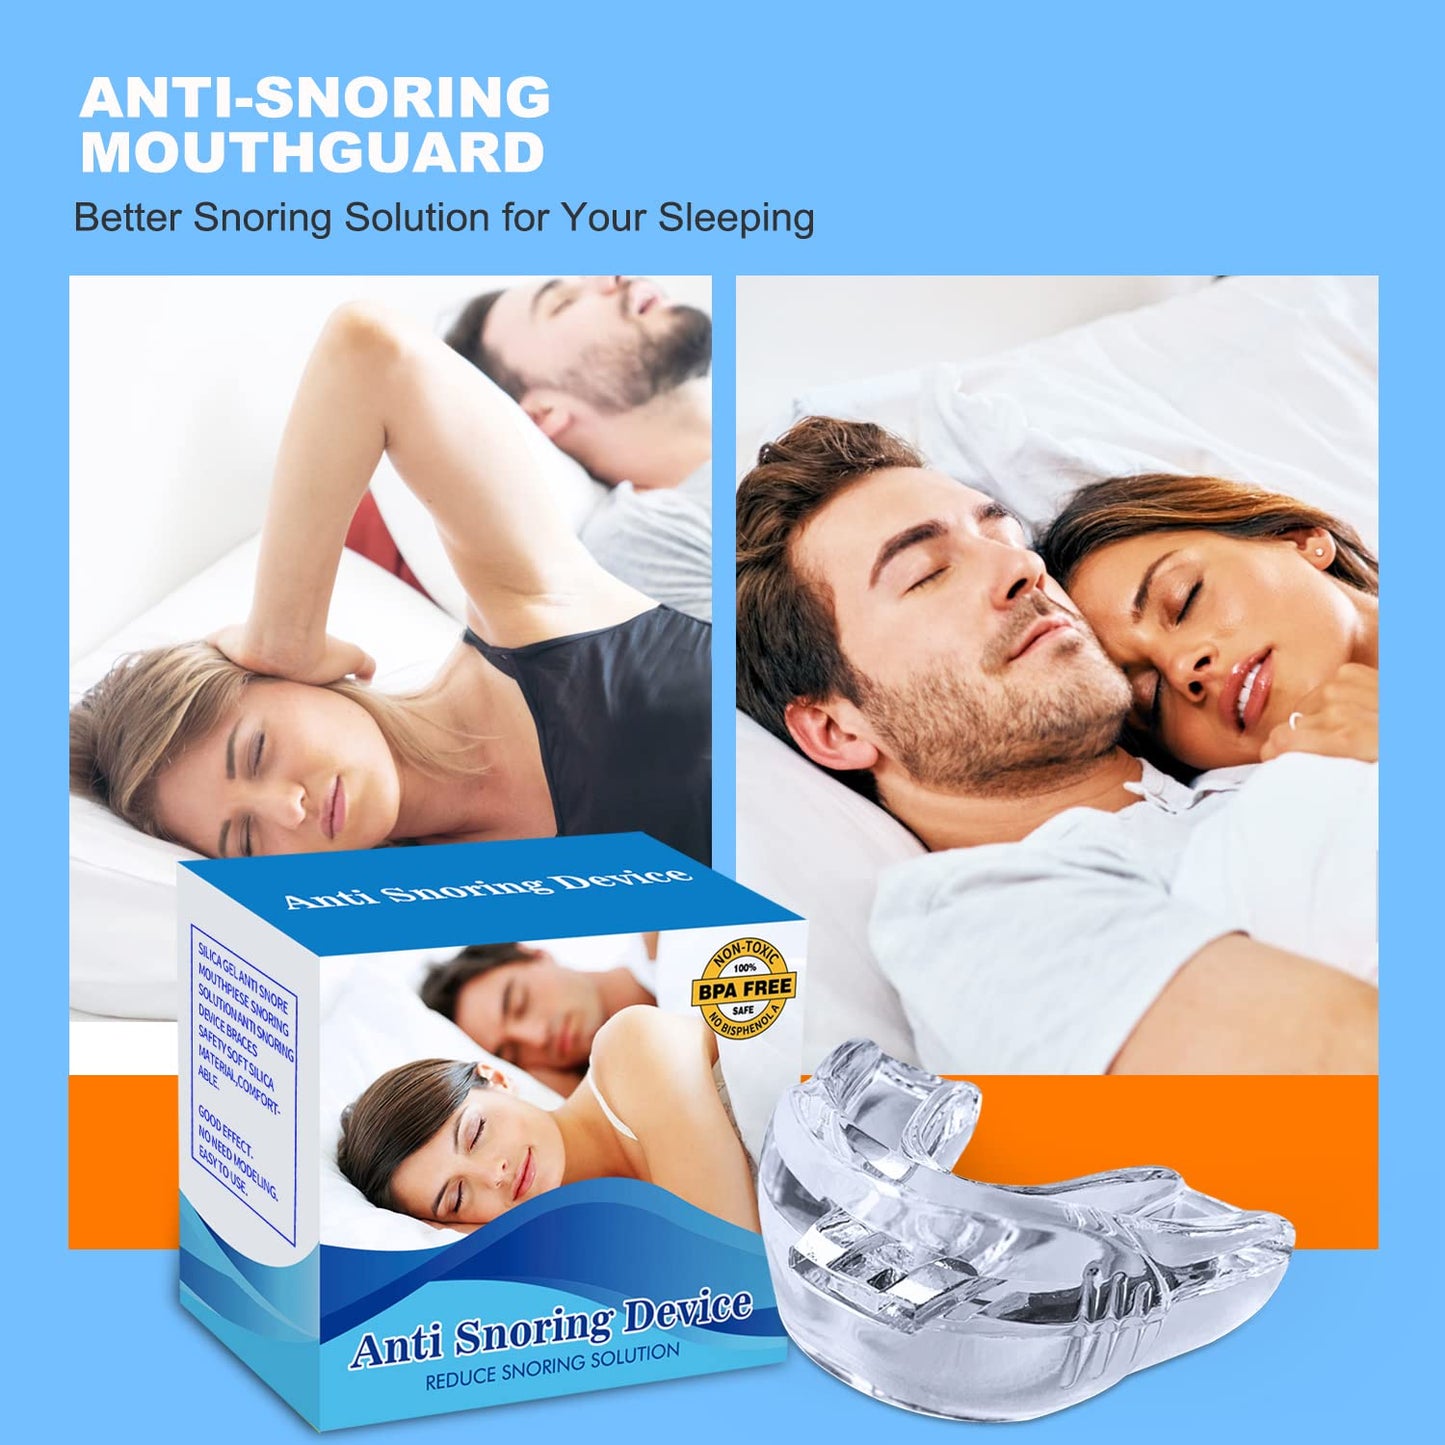 Anti-Snoring Mouthpiece, Anti-Snoring Mouth Guard, Comfortable Anti-Snoring Devices for Men/Women a Better Night's Sleep